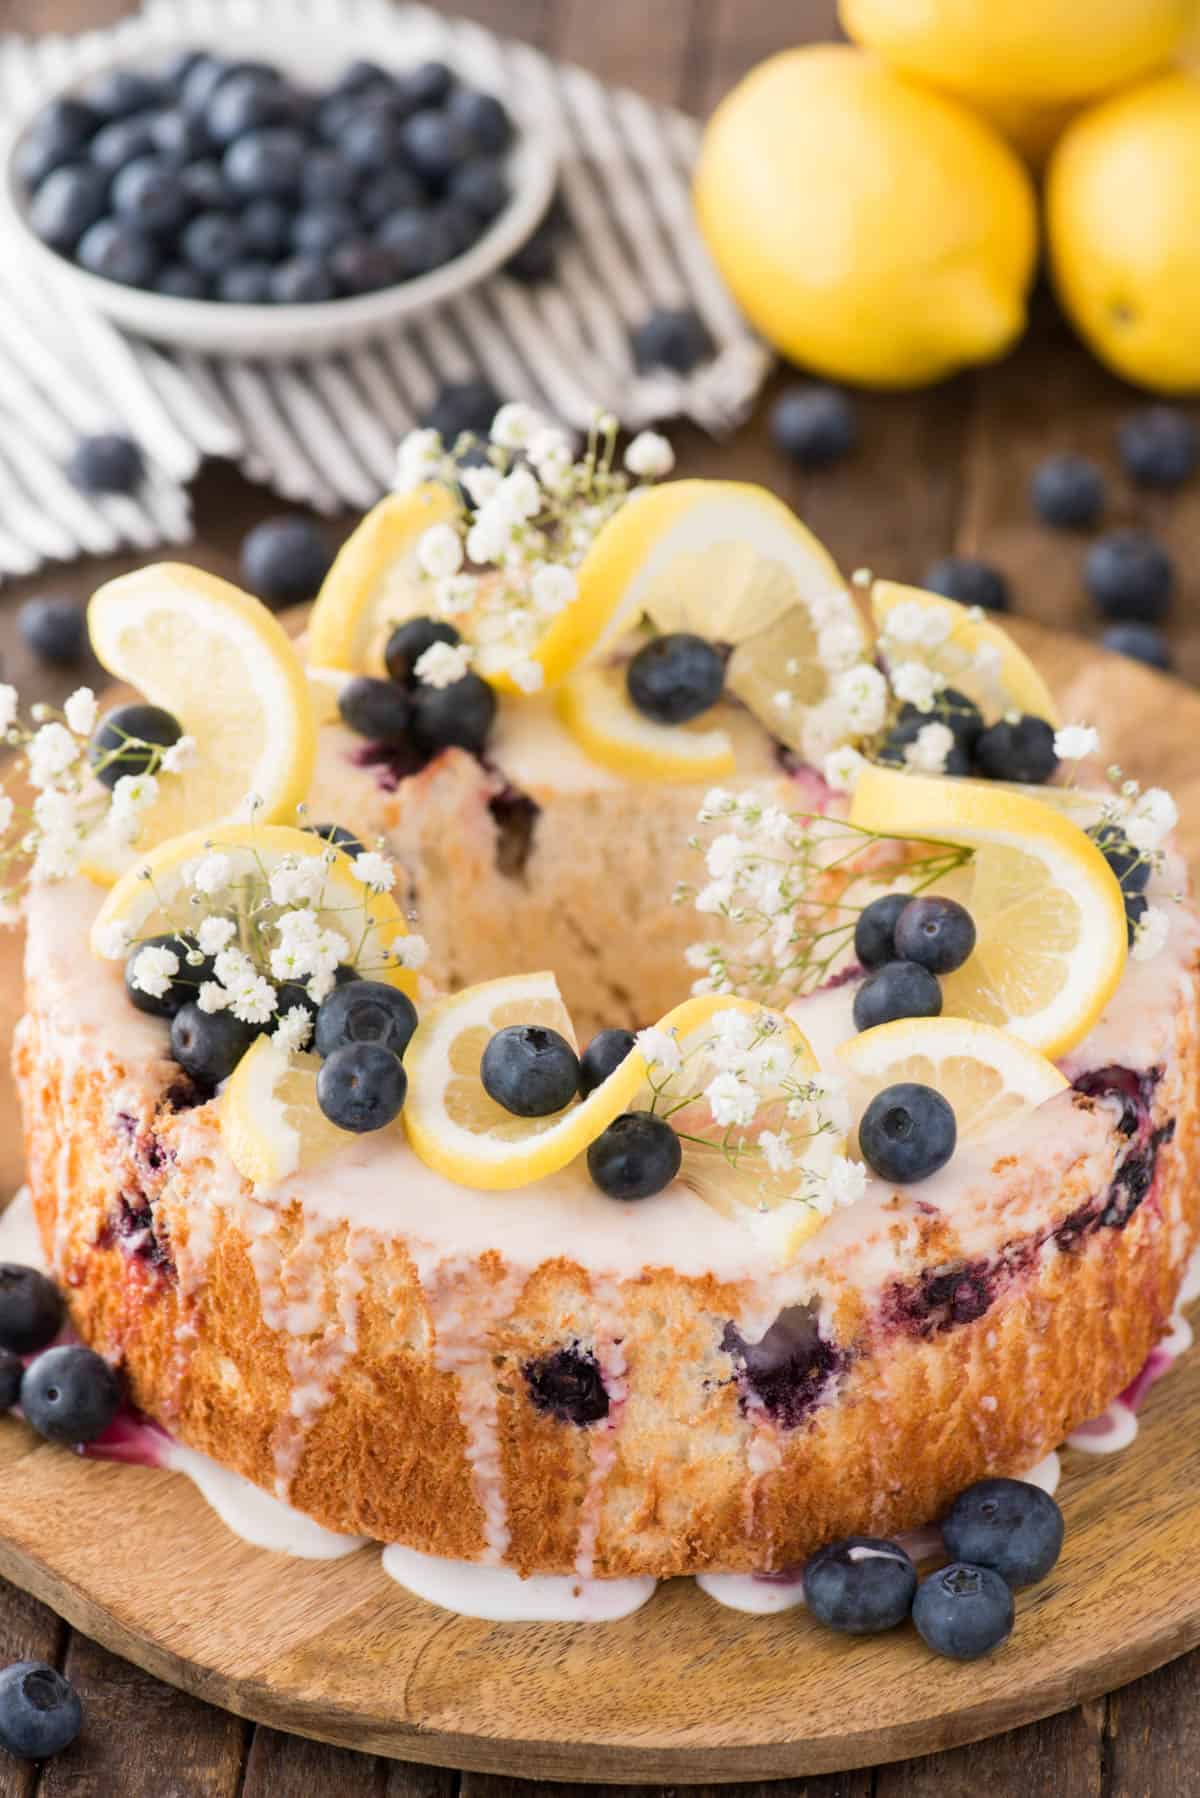 Lemon blueberry angel food cake with lemon slices, blueberries and baby’s breath as garnish on top of the cake on a wood serving plate. 